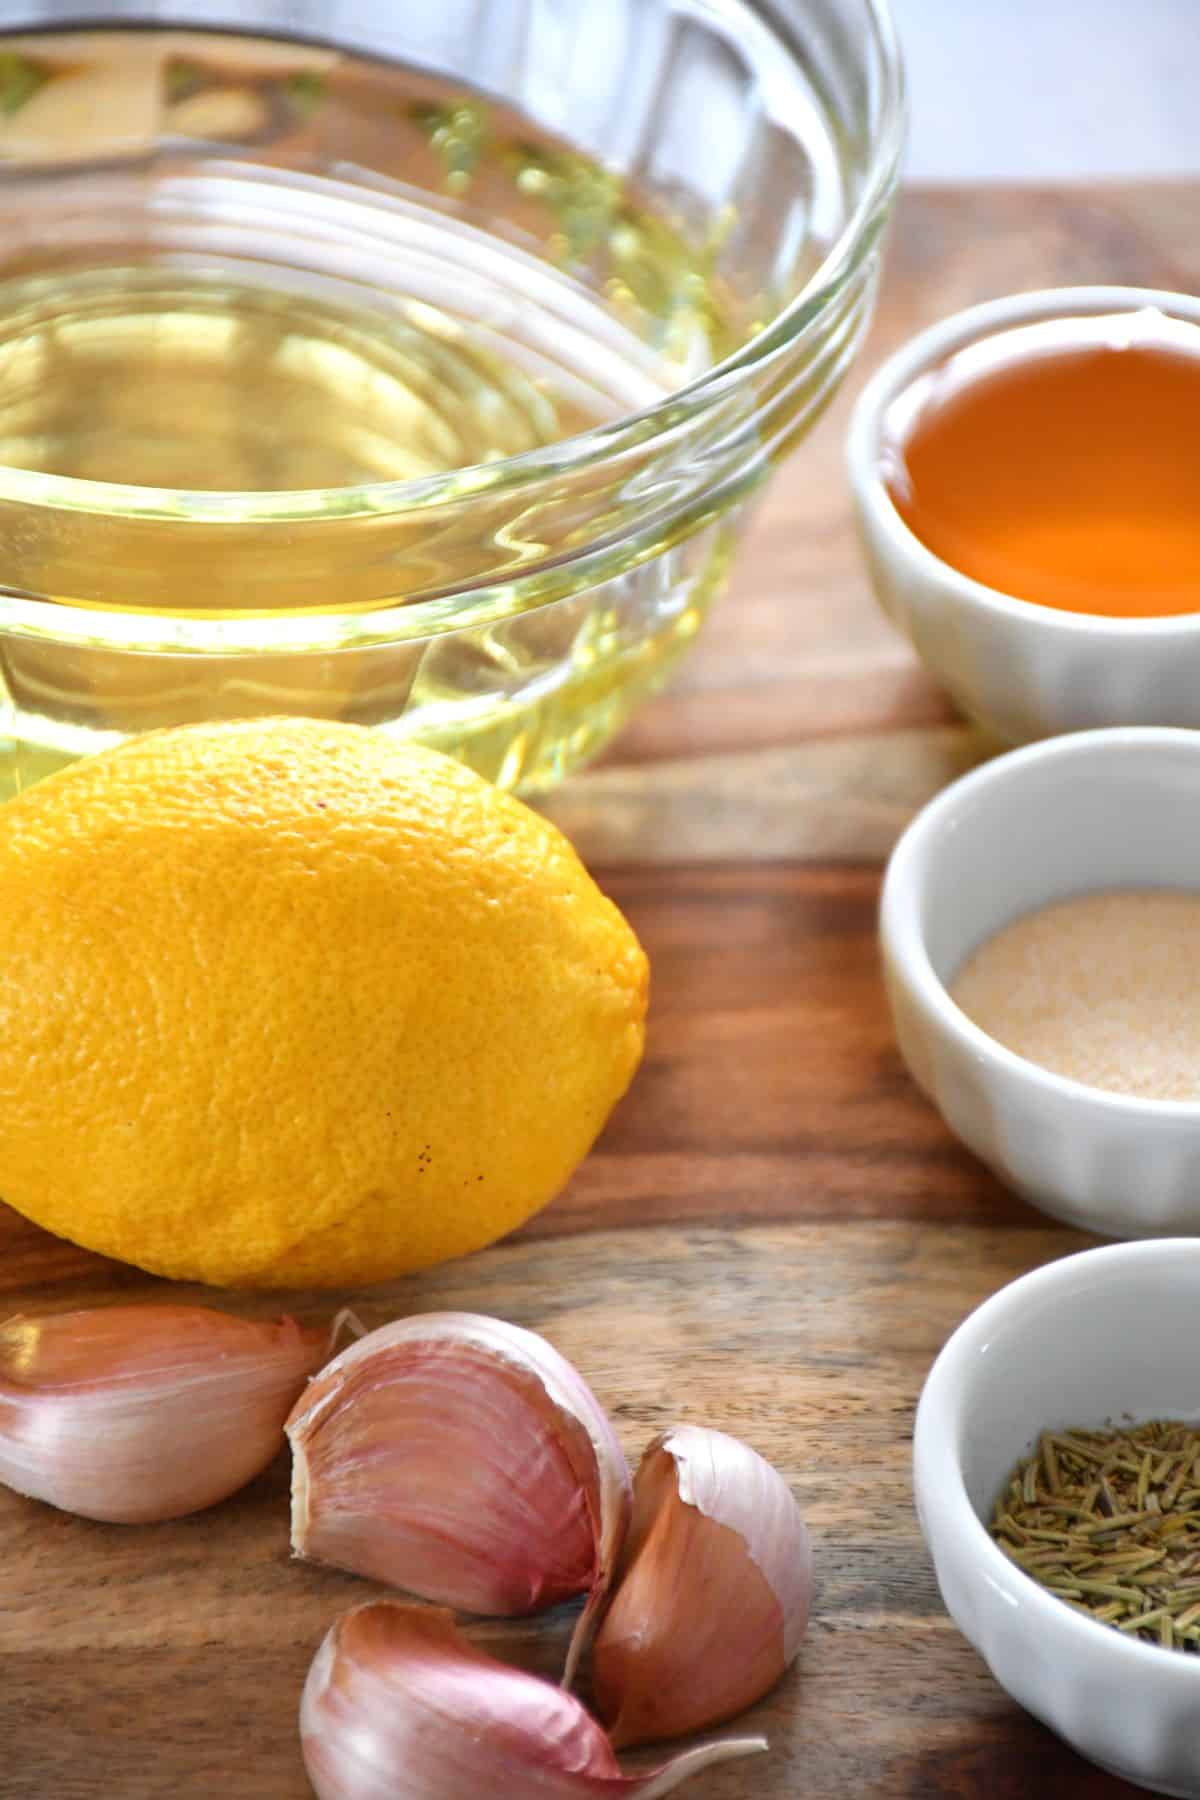 Oil, honey, lemon, garlic, onion powder and dried rosemary displayed on a wooden board to make honey and rosemary marinade.